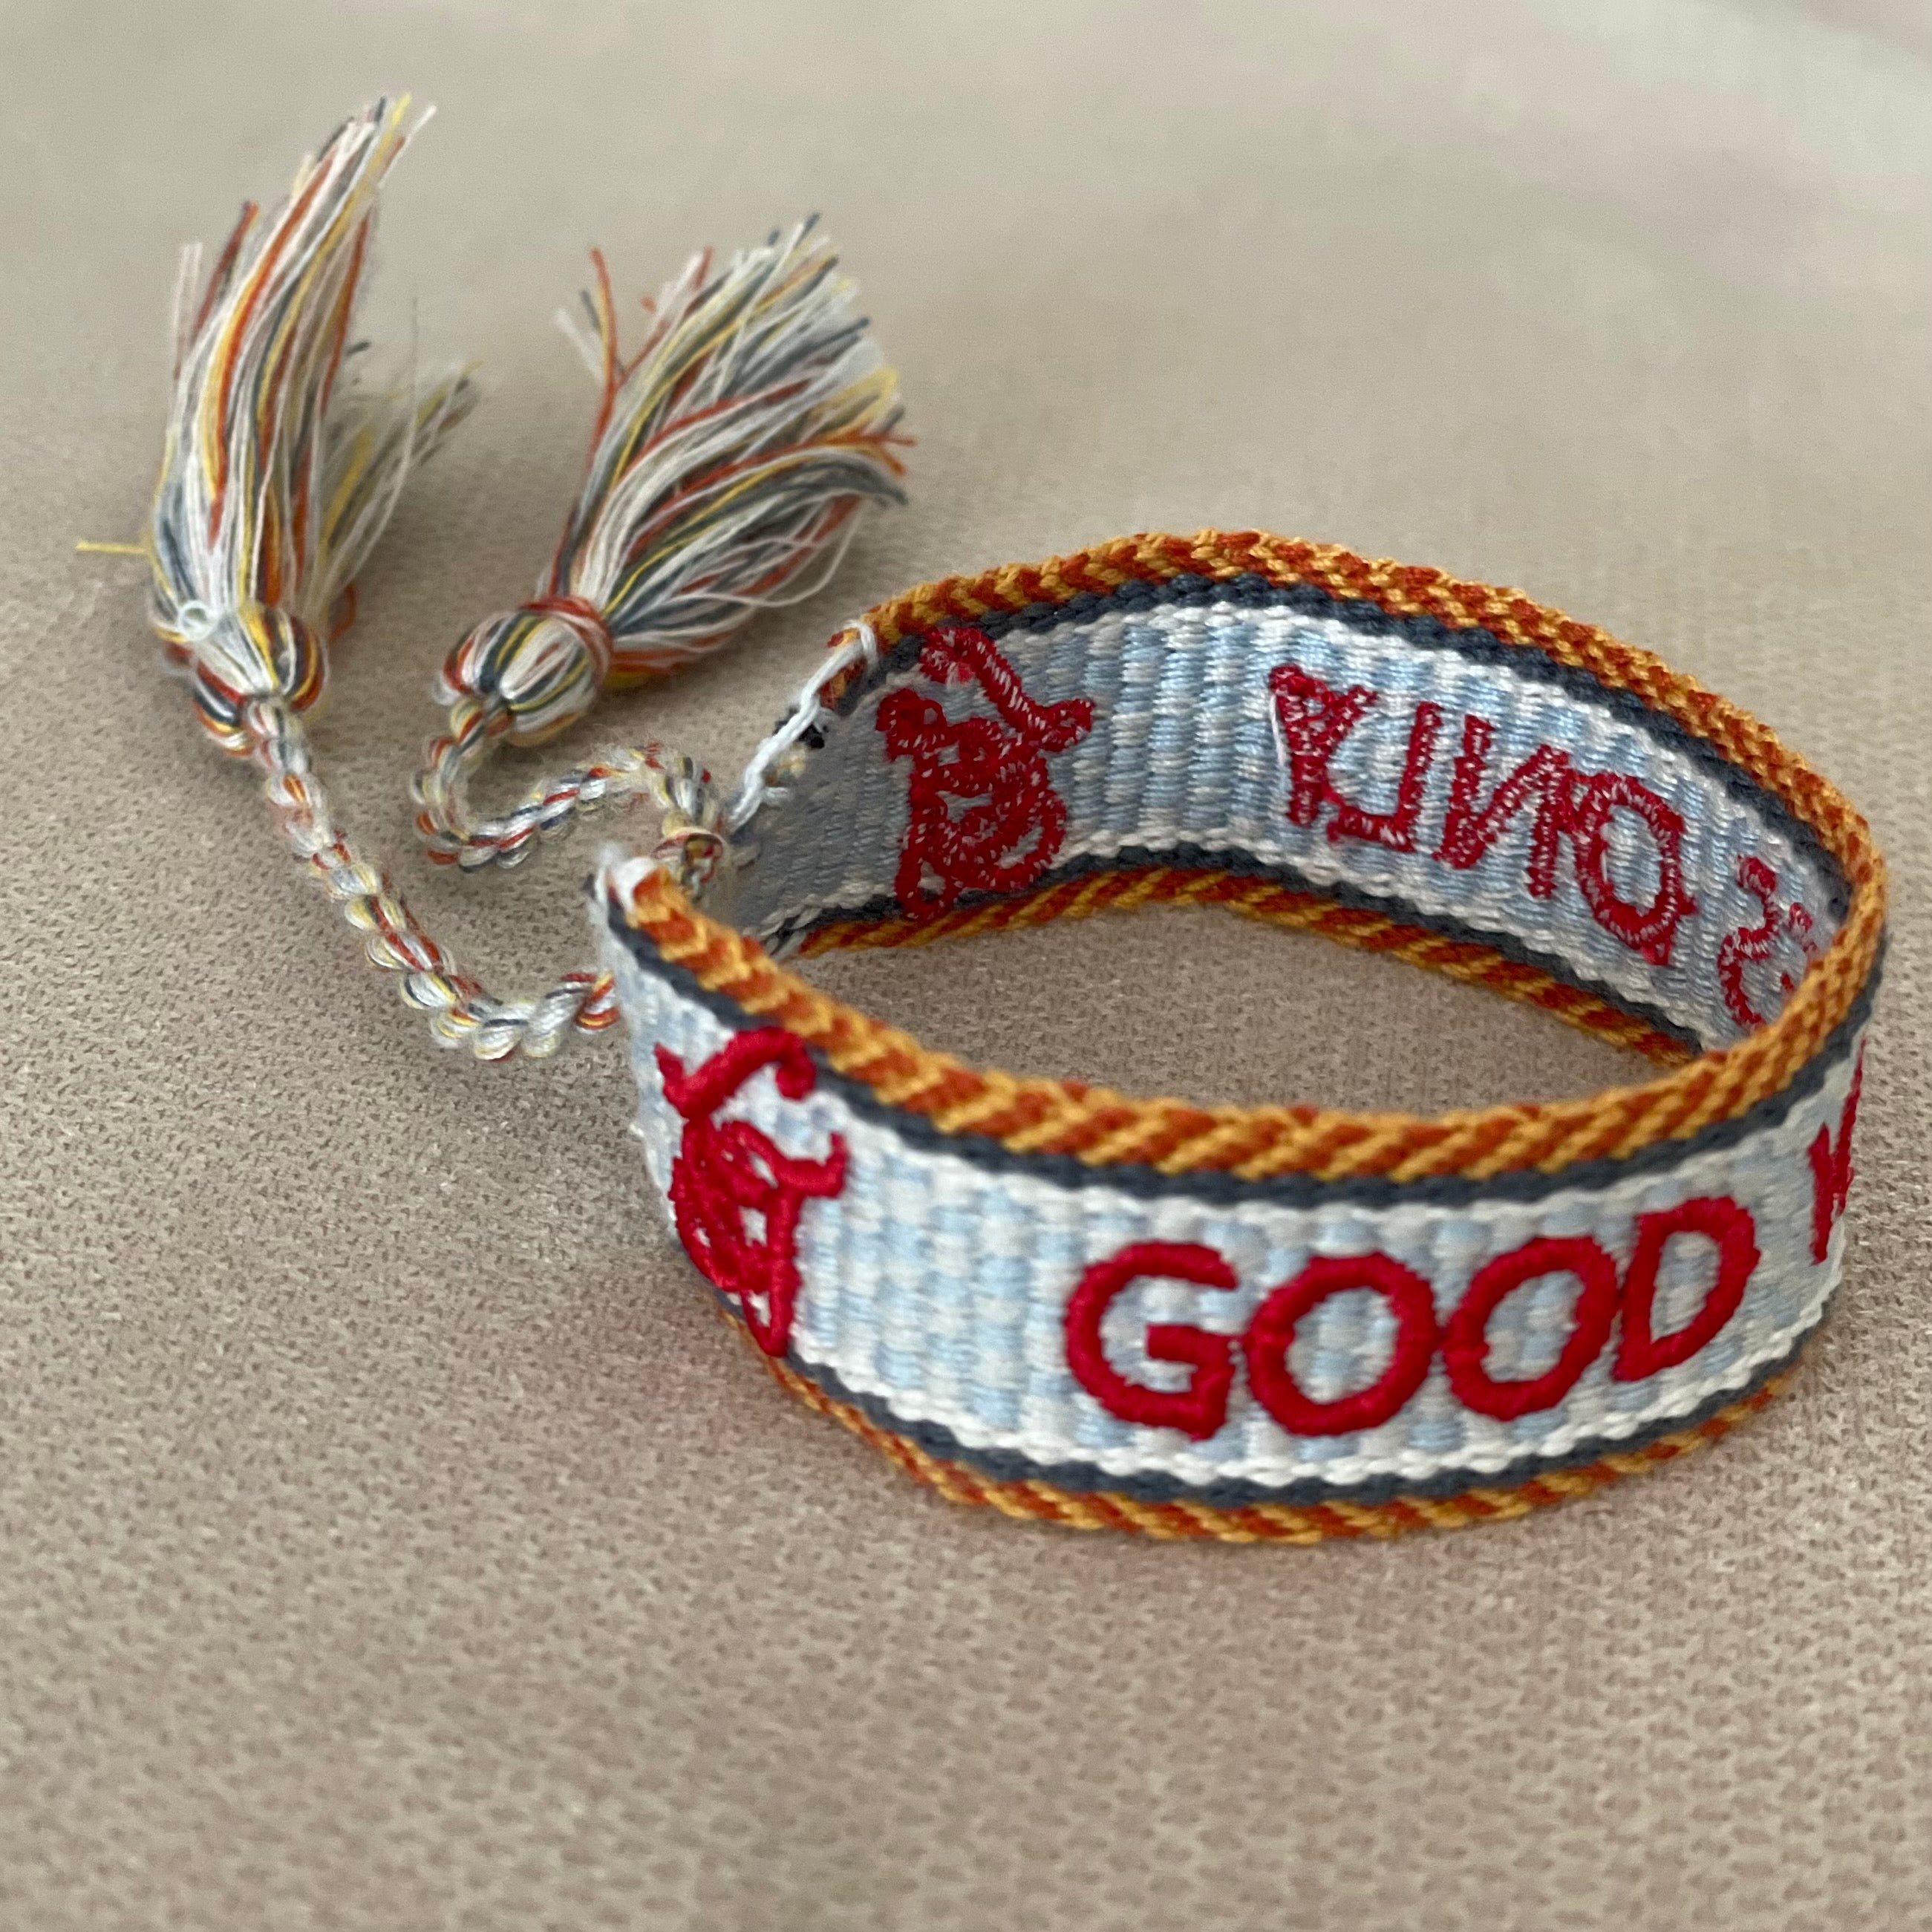 Bracelet coulissant «GOOD VIBES ONLY» rouge